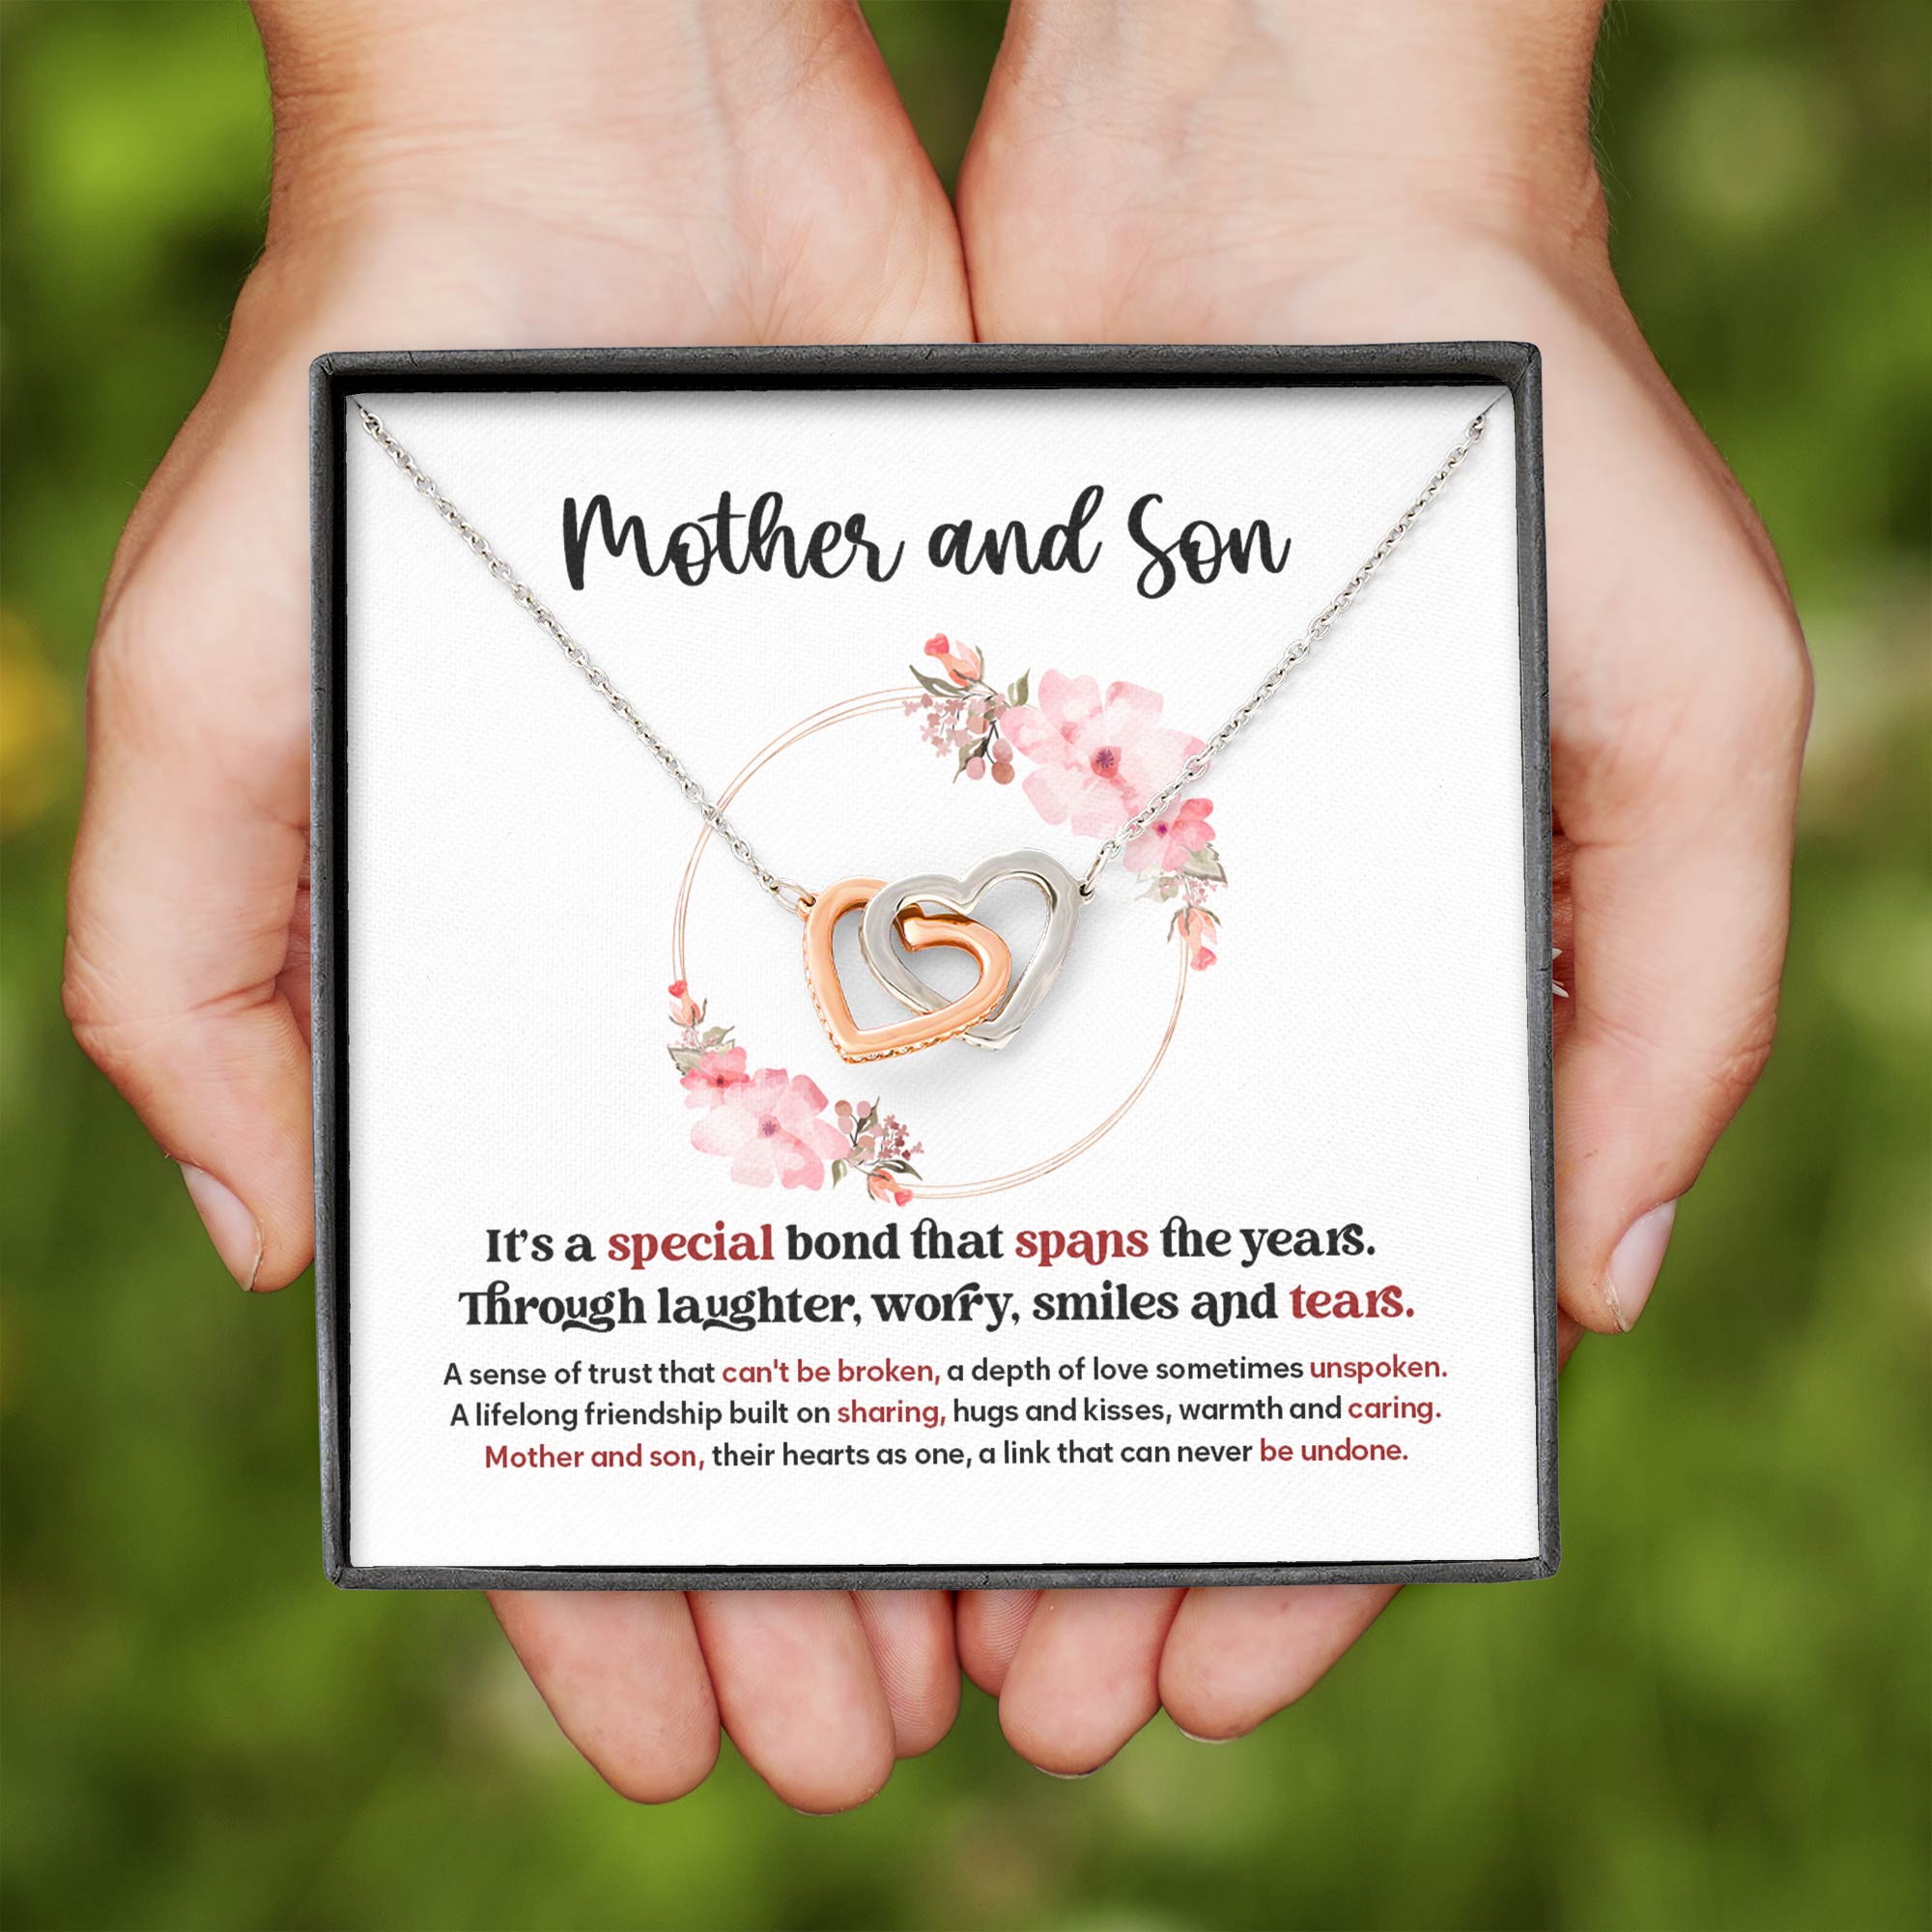 Mom Necklace, Mother and son necklace gift, happy mother's day gift from son,  cute gift for mom - Necklacespring